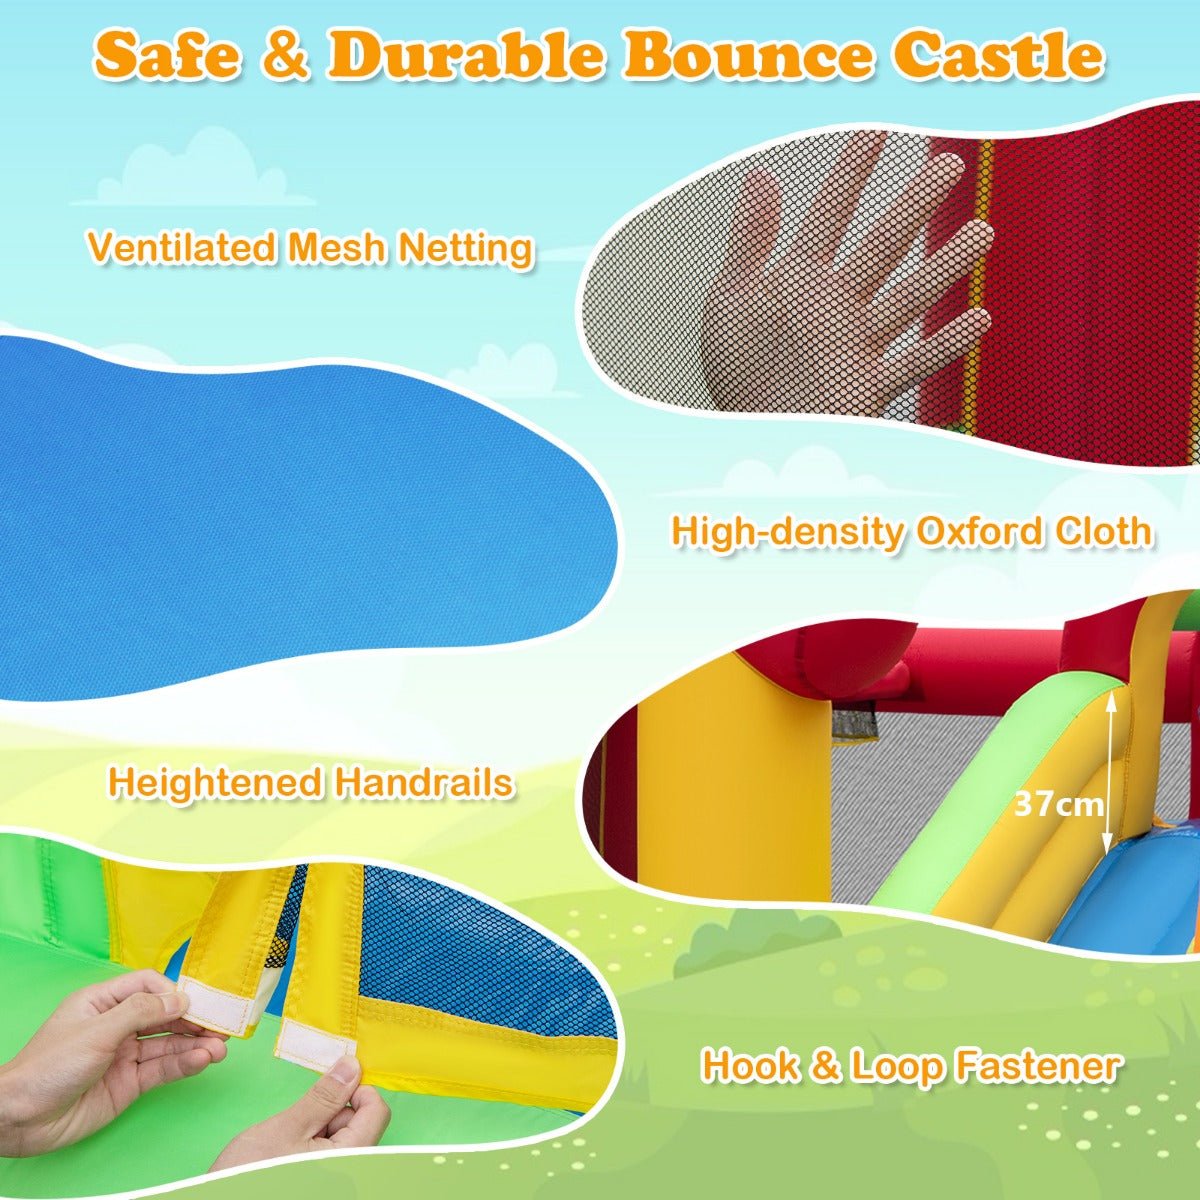 Quality Inflatable Bounce House at Kids Mega Mart - Shop Now!